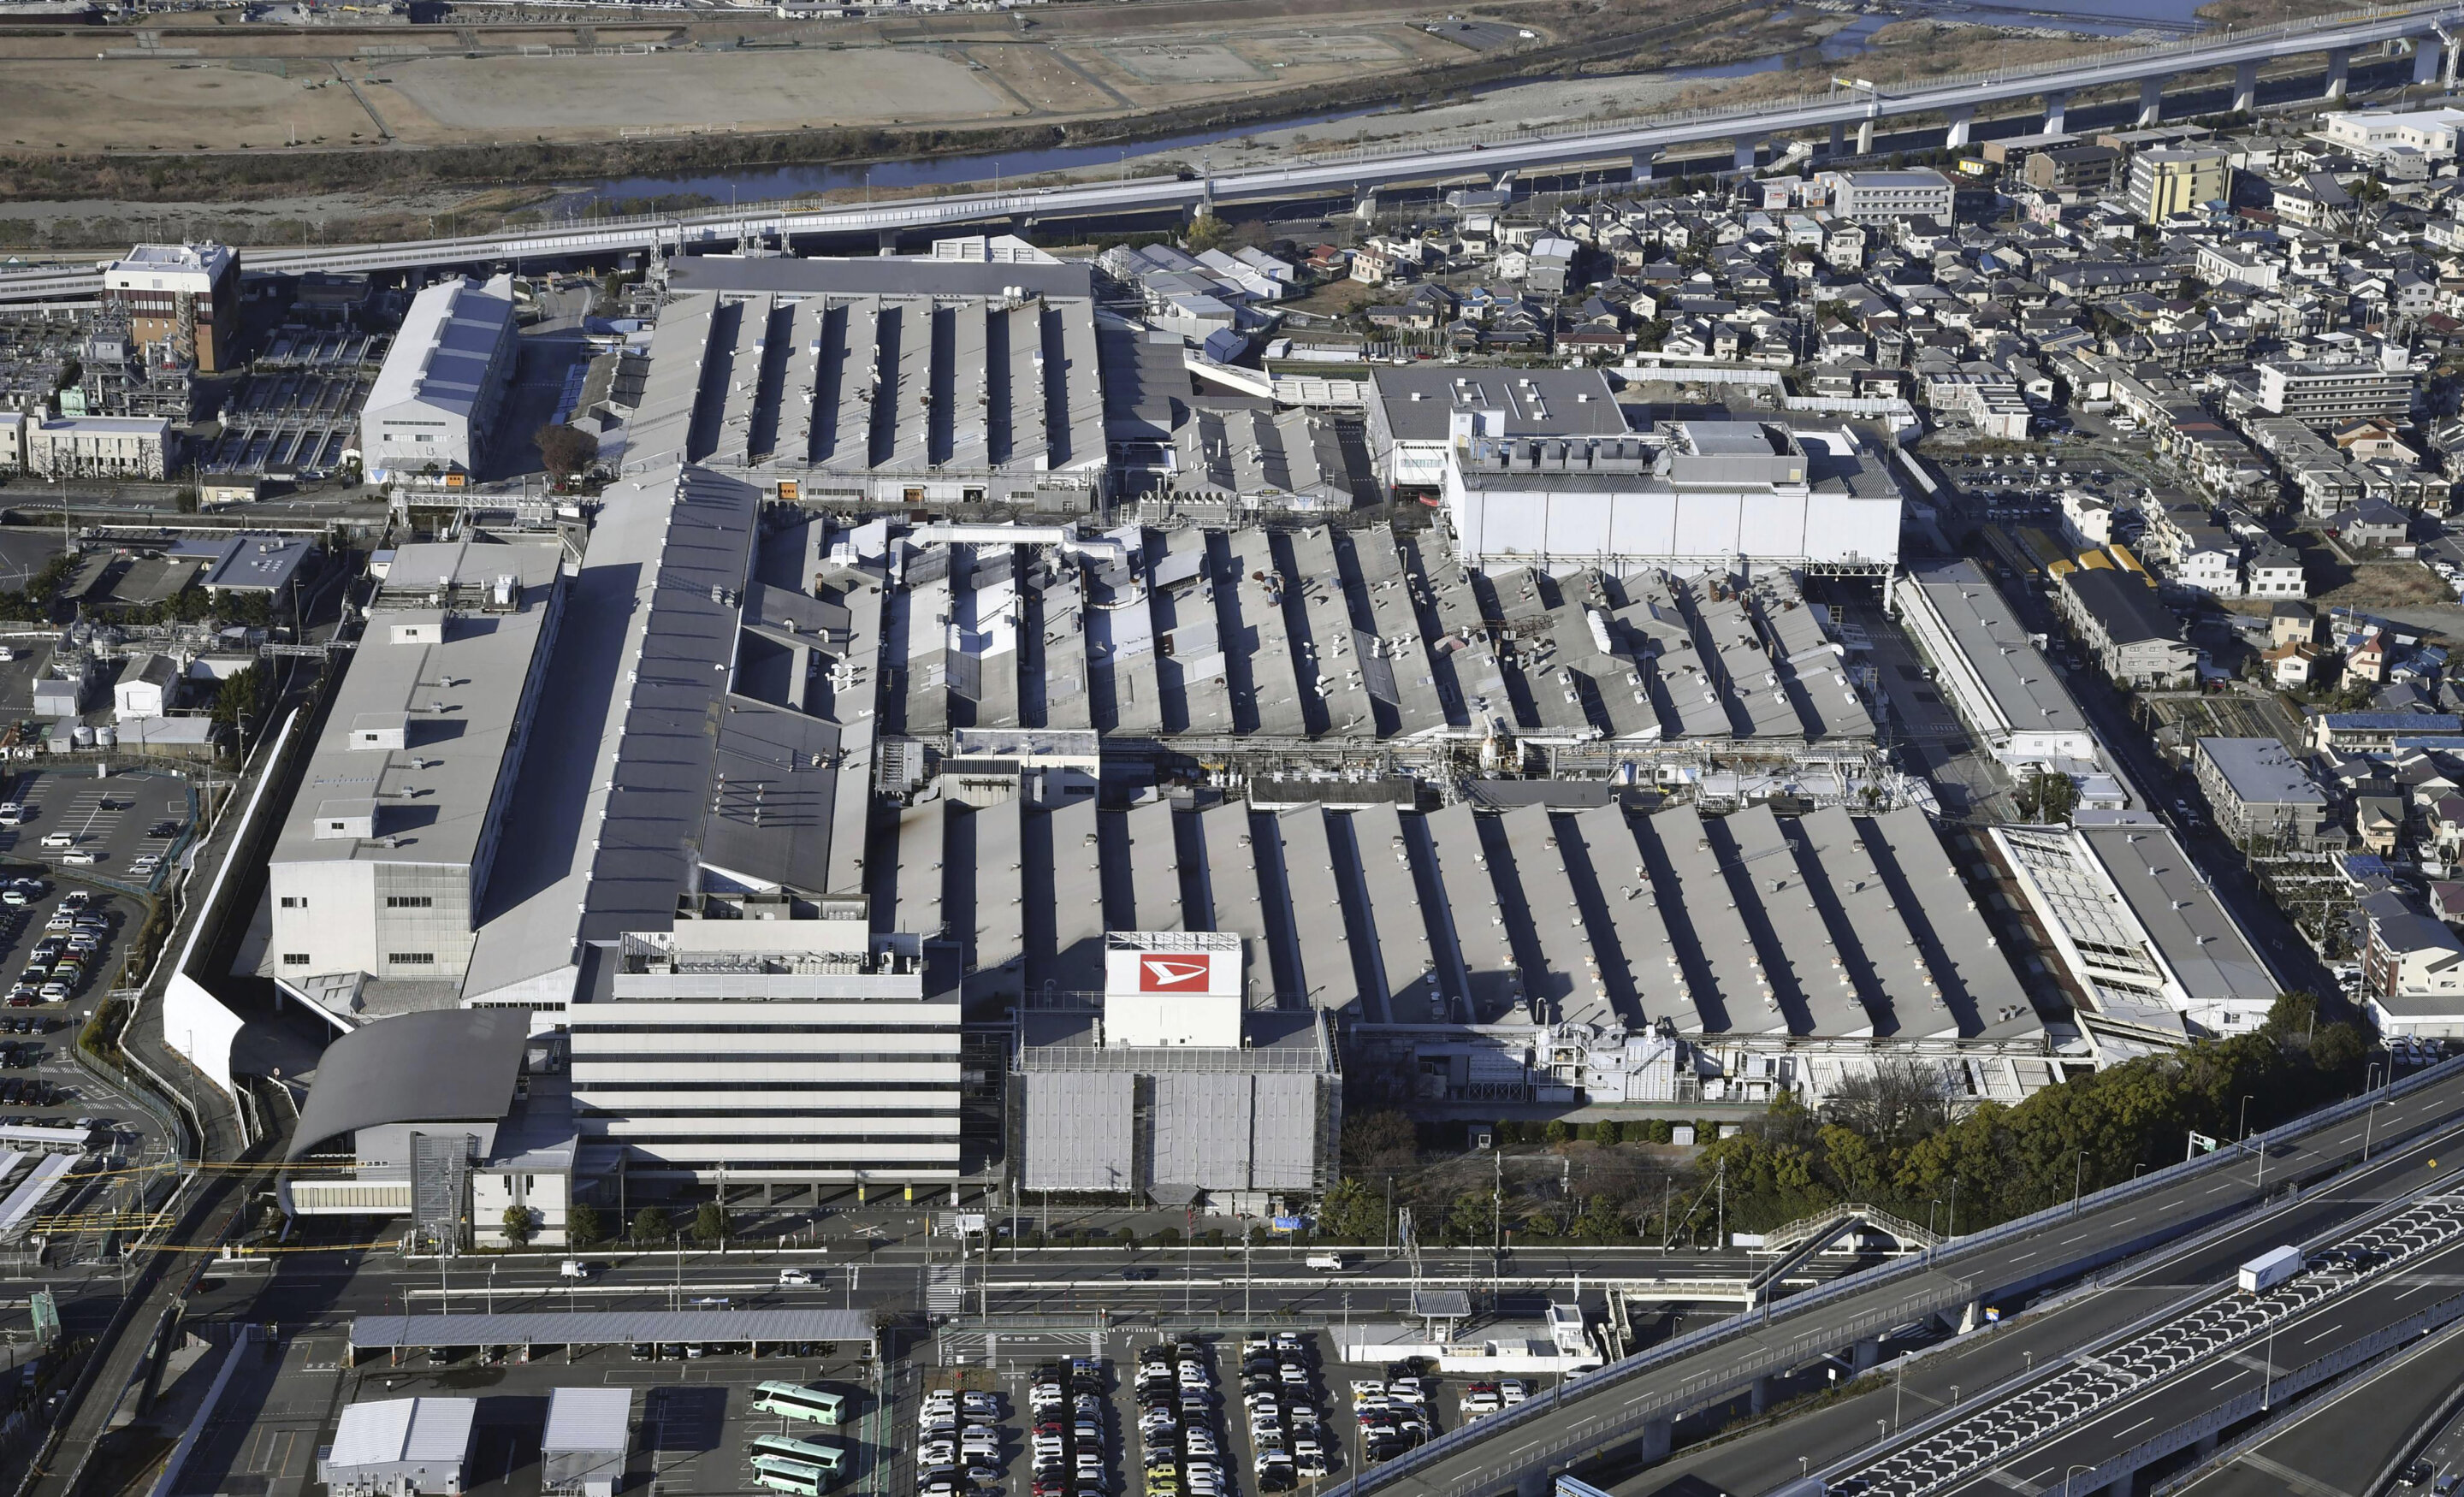 #Toyota small car maker Daihatsu shuts down Japan factories during probe of bogus safety tests